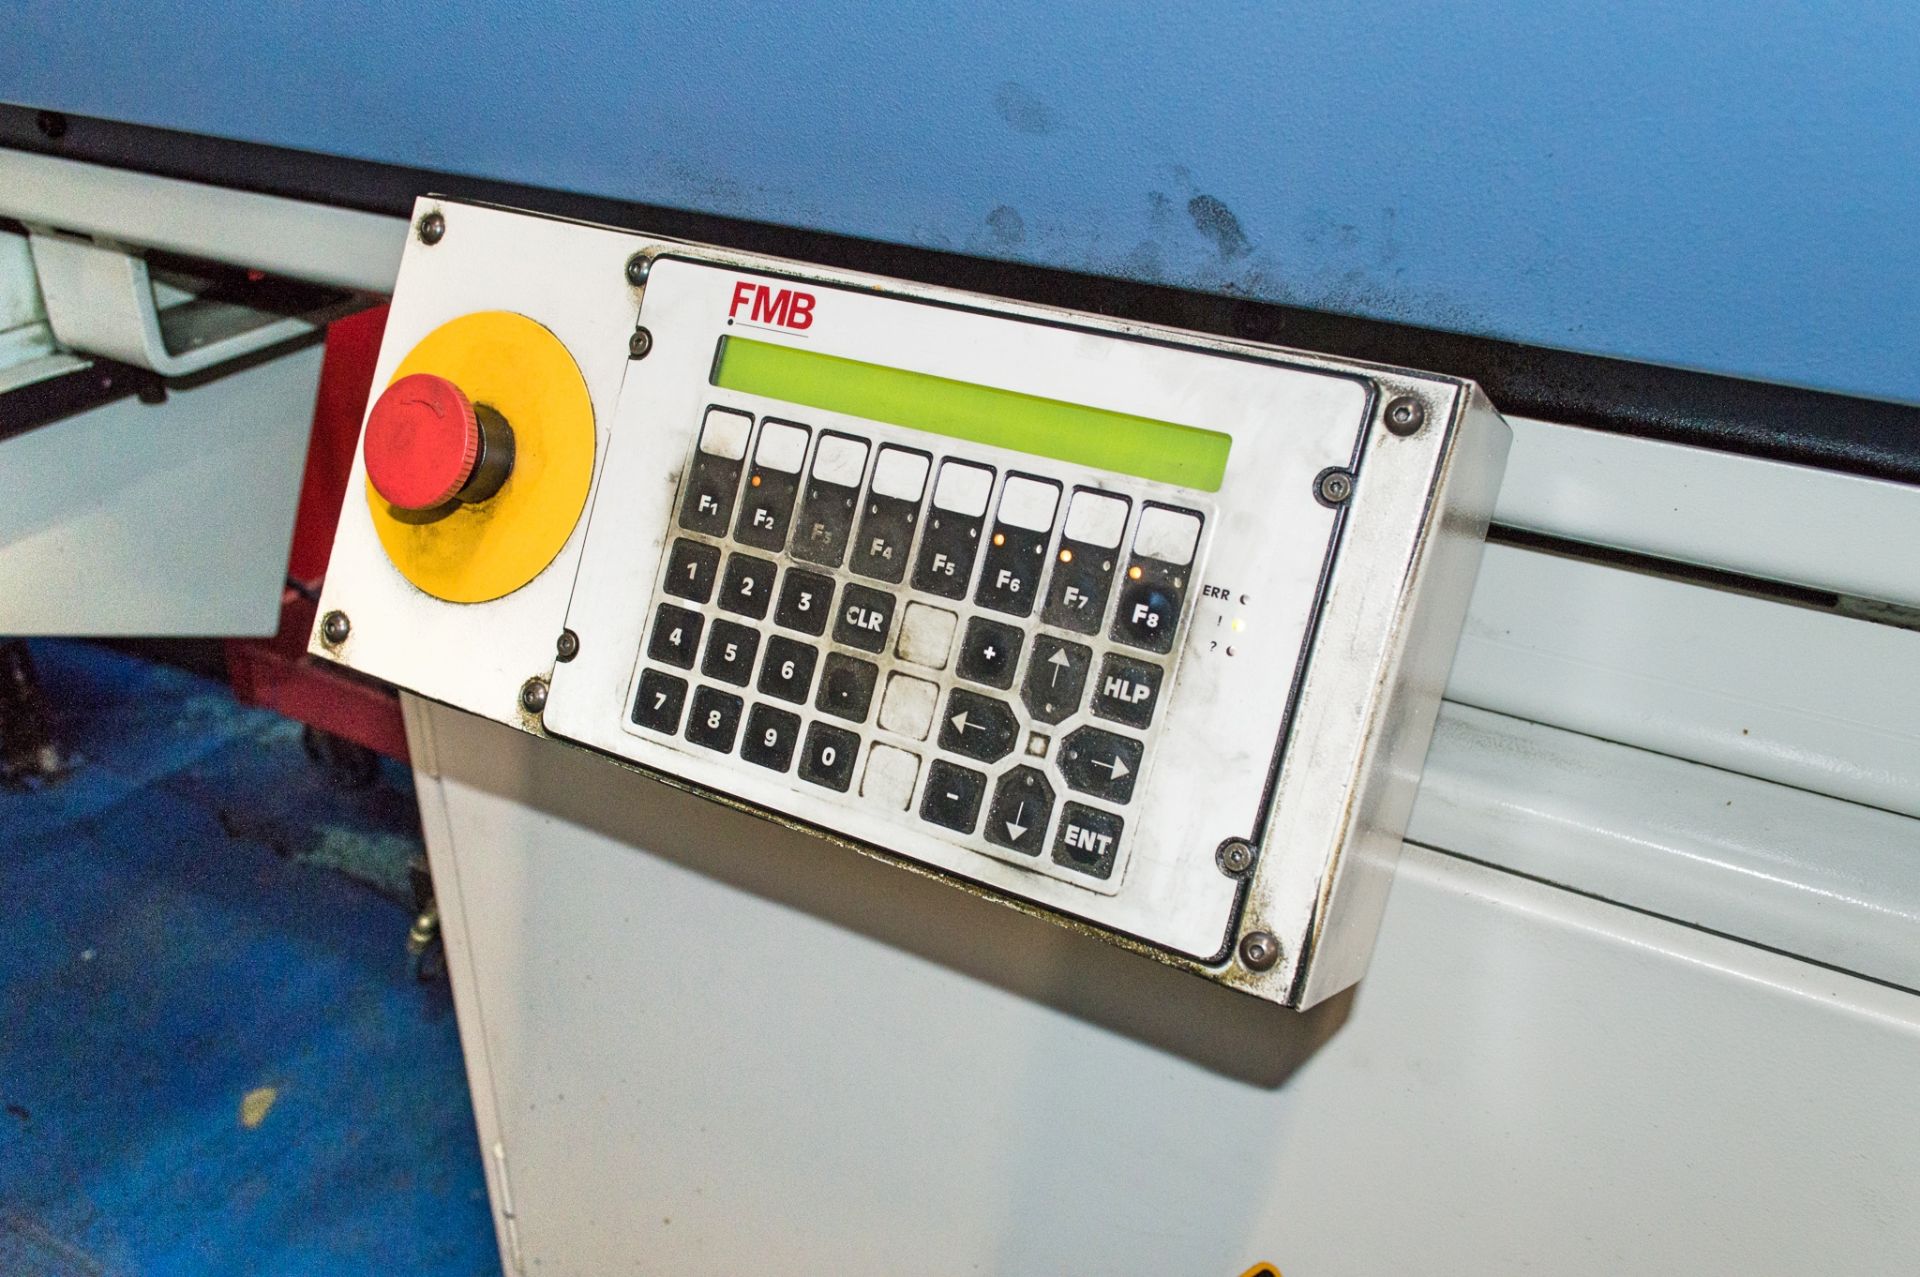 Star SR-32 Type 330 CNC sliding head lathe S/N: 031016 c/w Fanuc 16-T controls, component delivery - Image 9 of 12